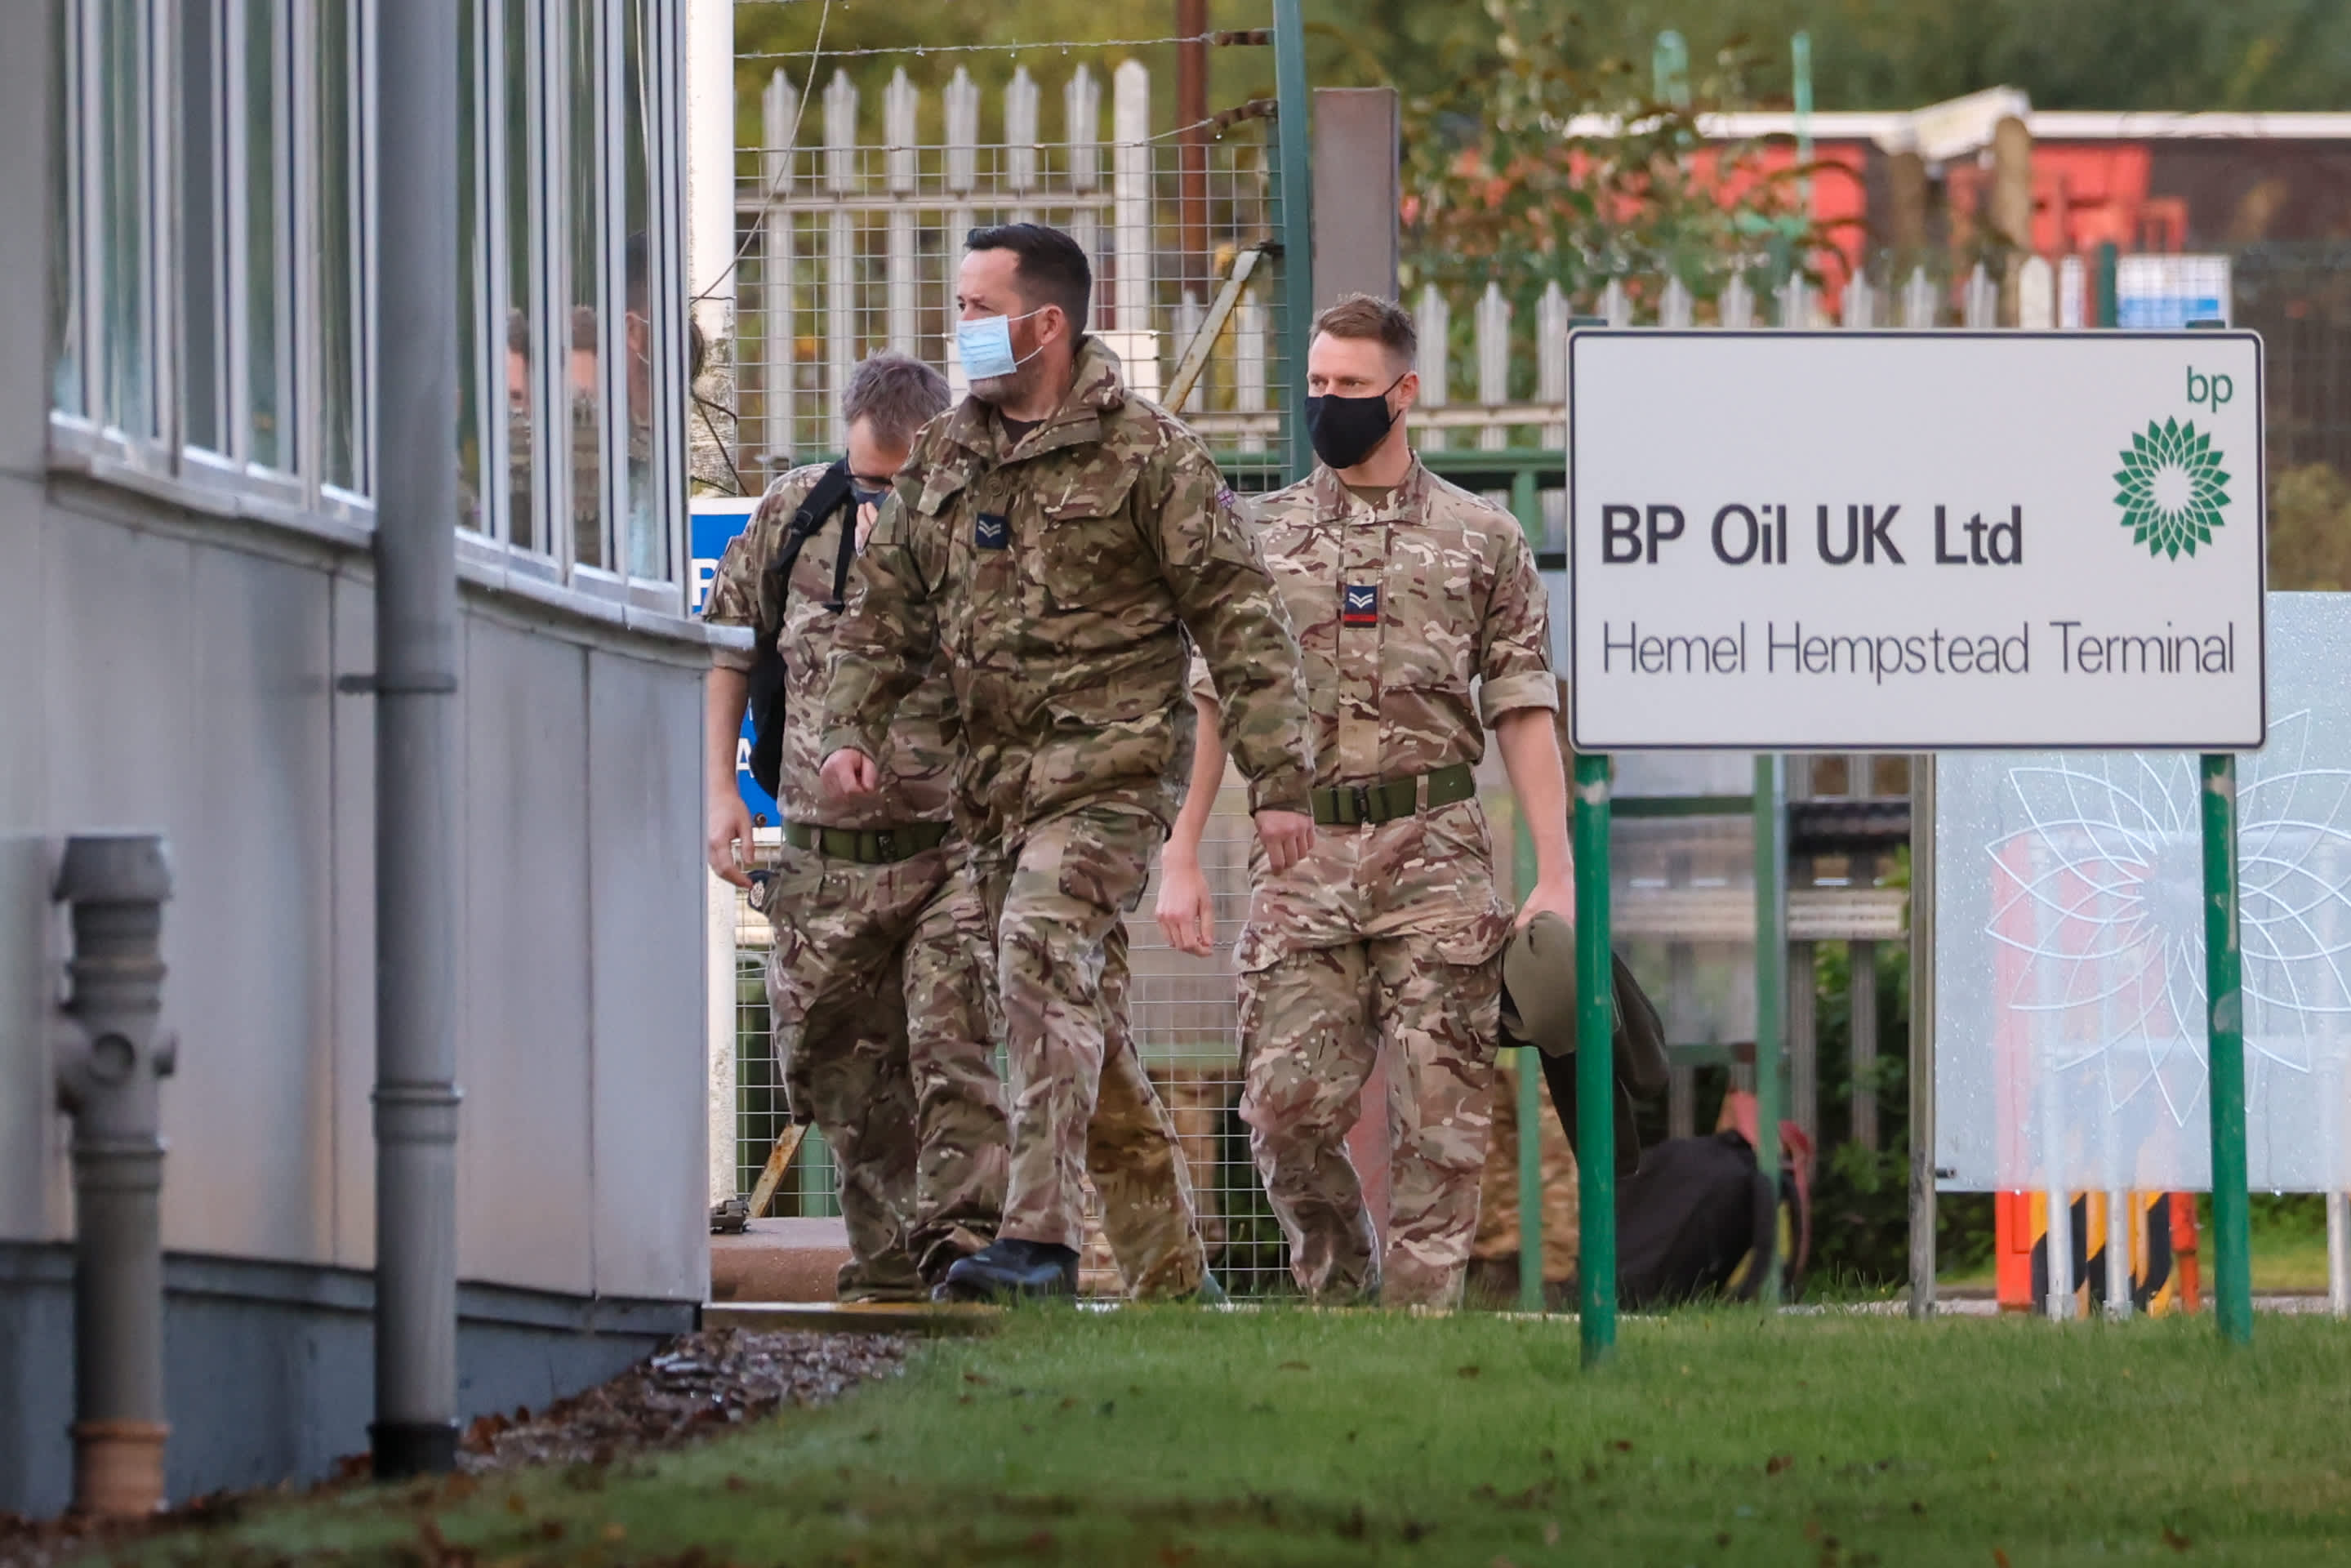 Britain deploys its army to deliver fuel as panic buying and shortages continue